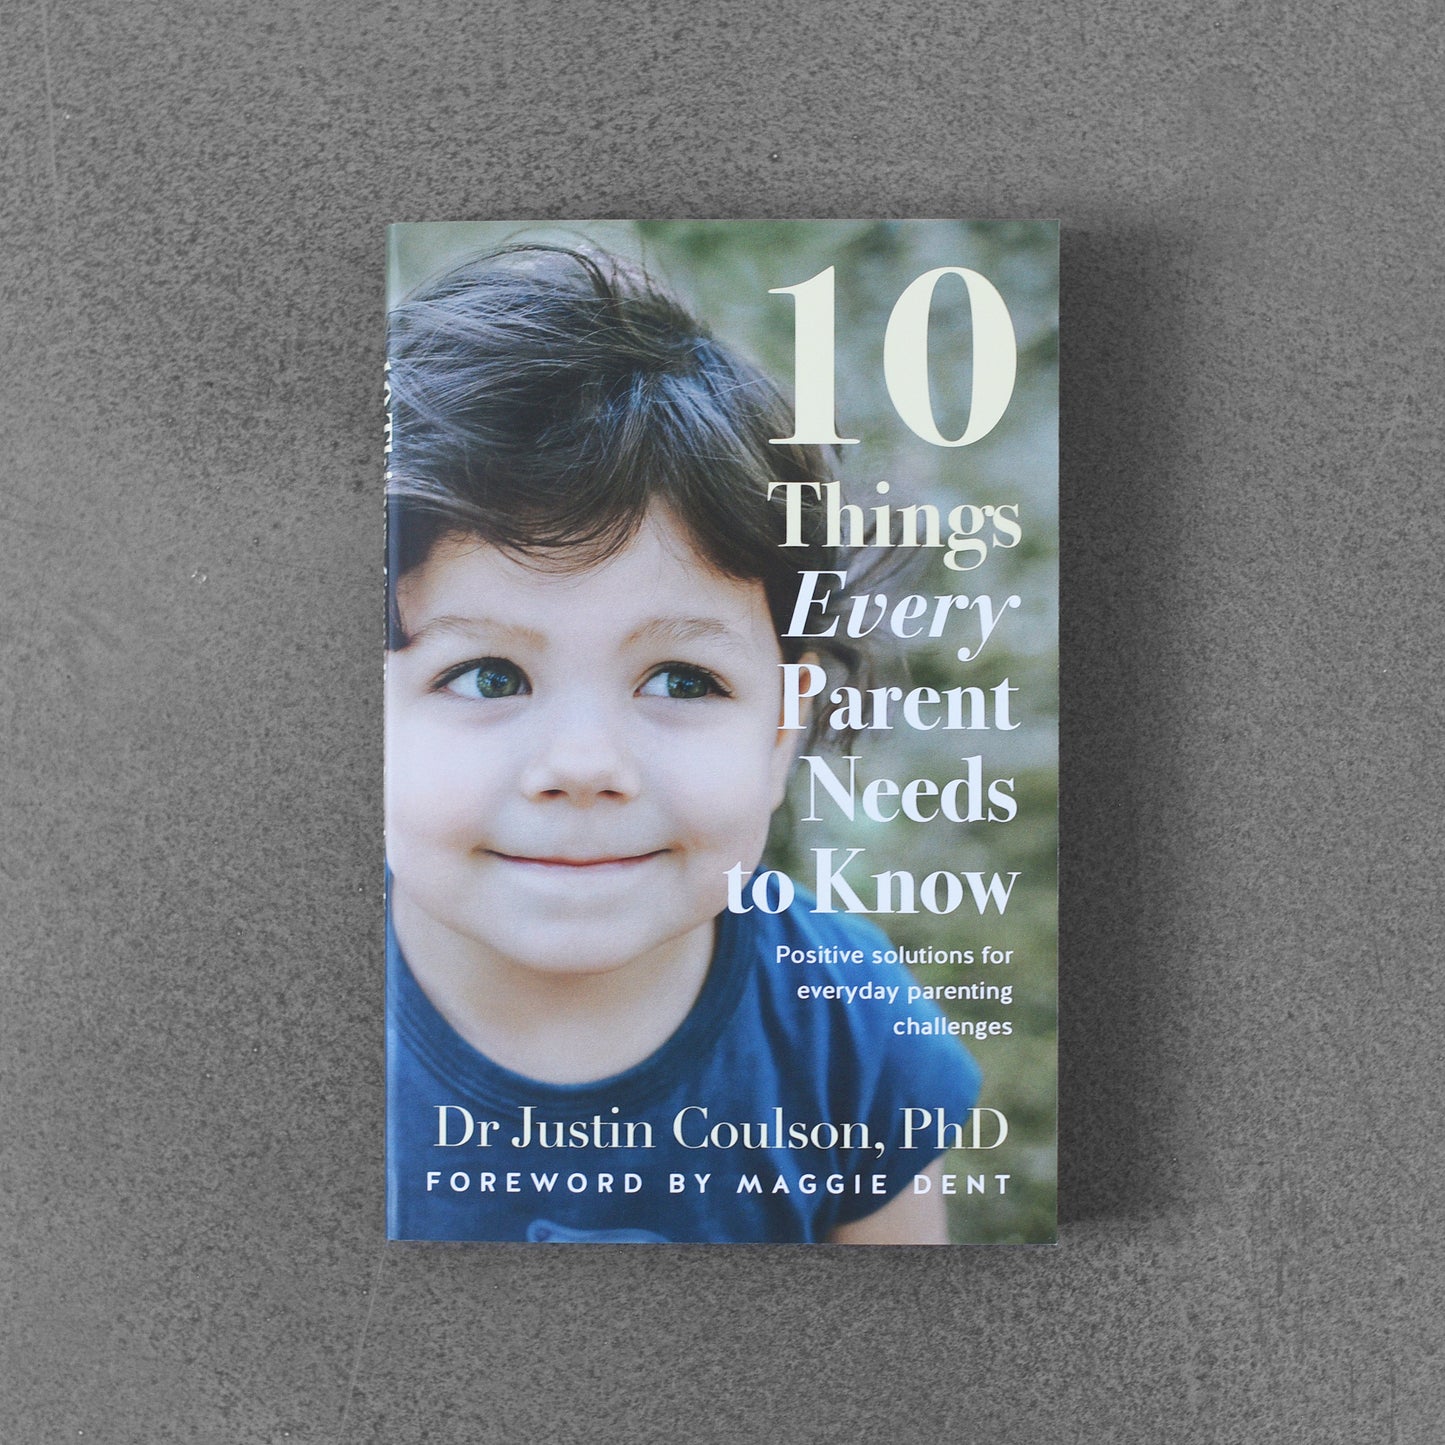 10 Things Every Parent Needs to Know - Dr Justin Coulson, PhD